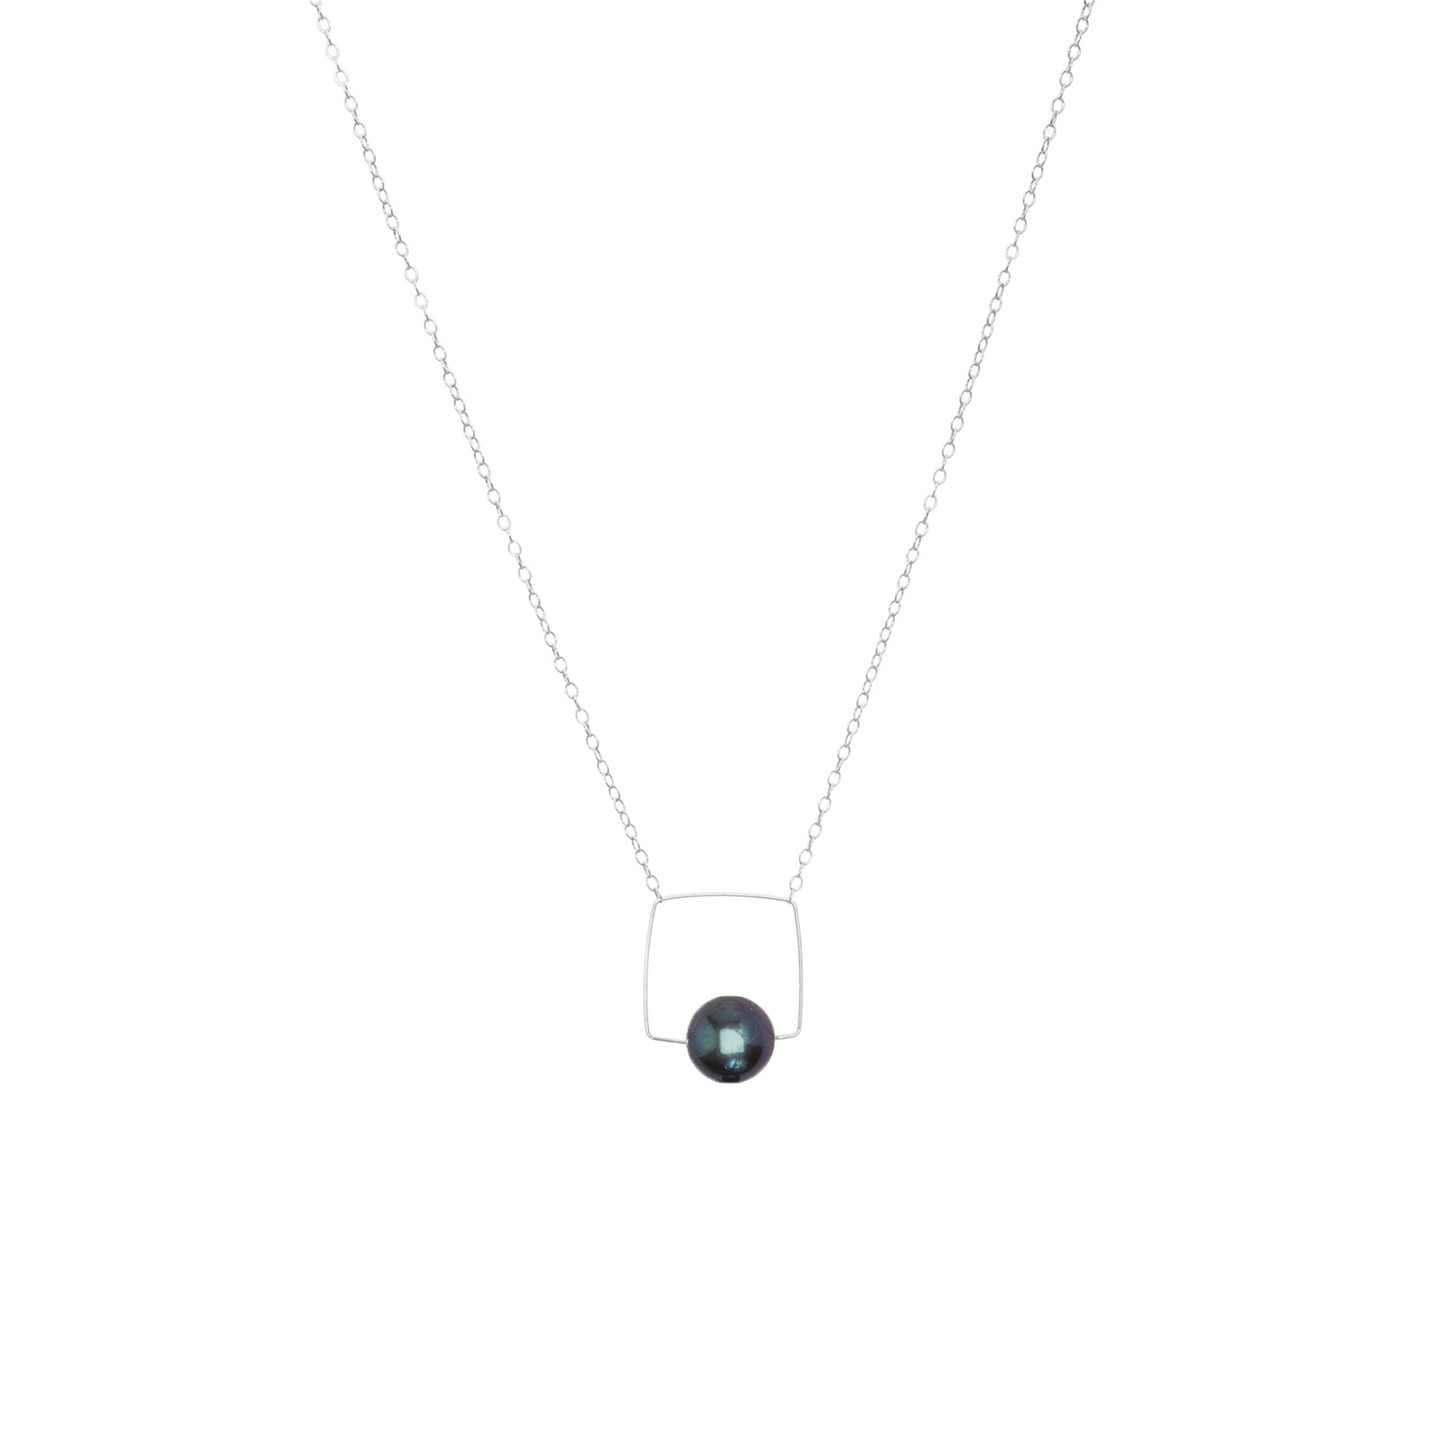 Medium Square Pendant Necklace with Round Freshwater Pearl